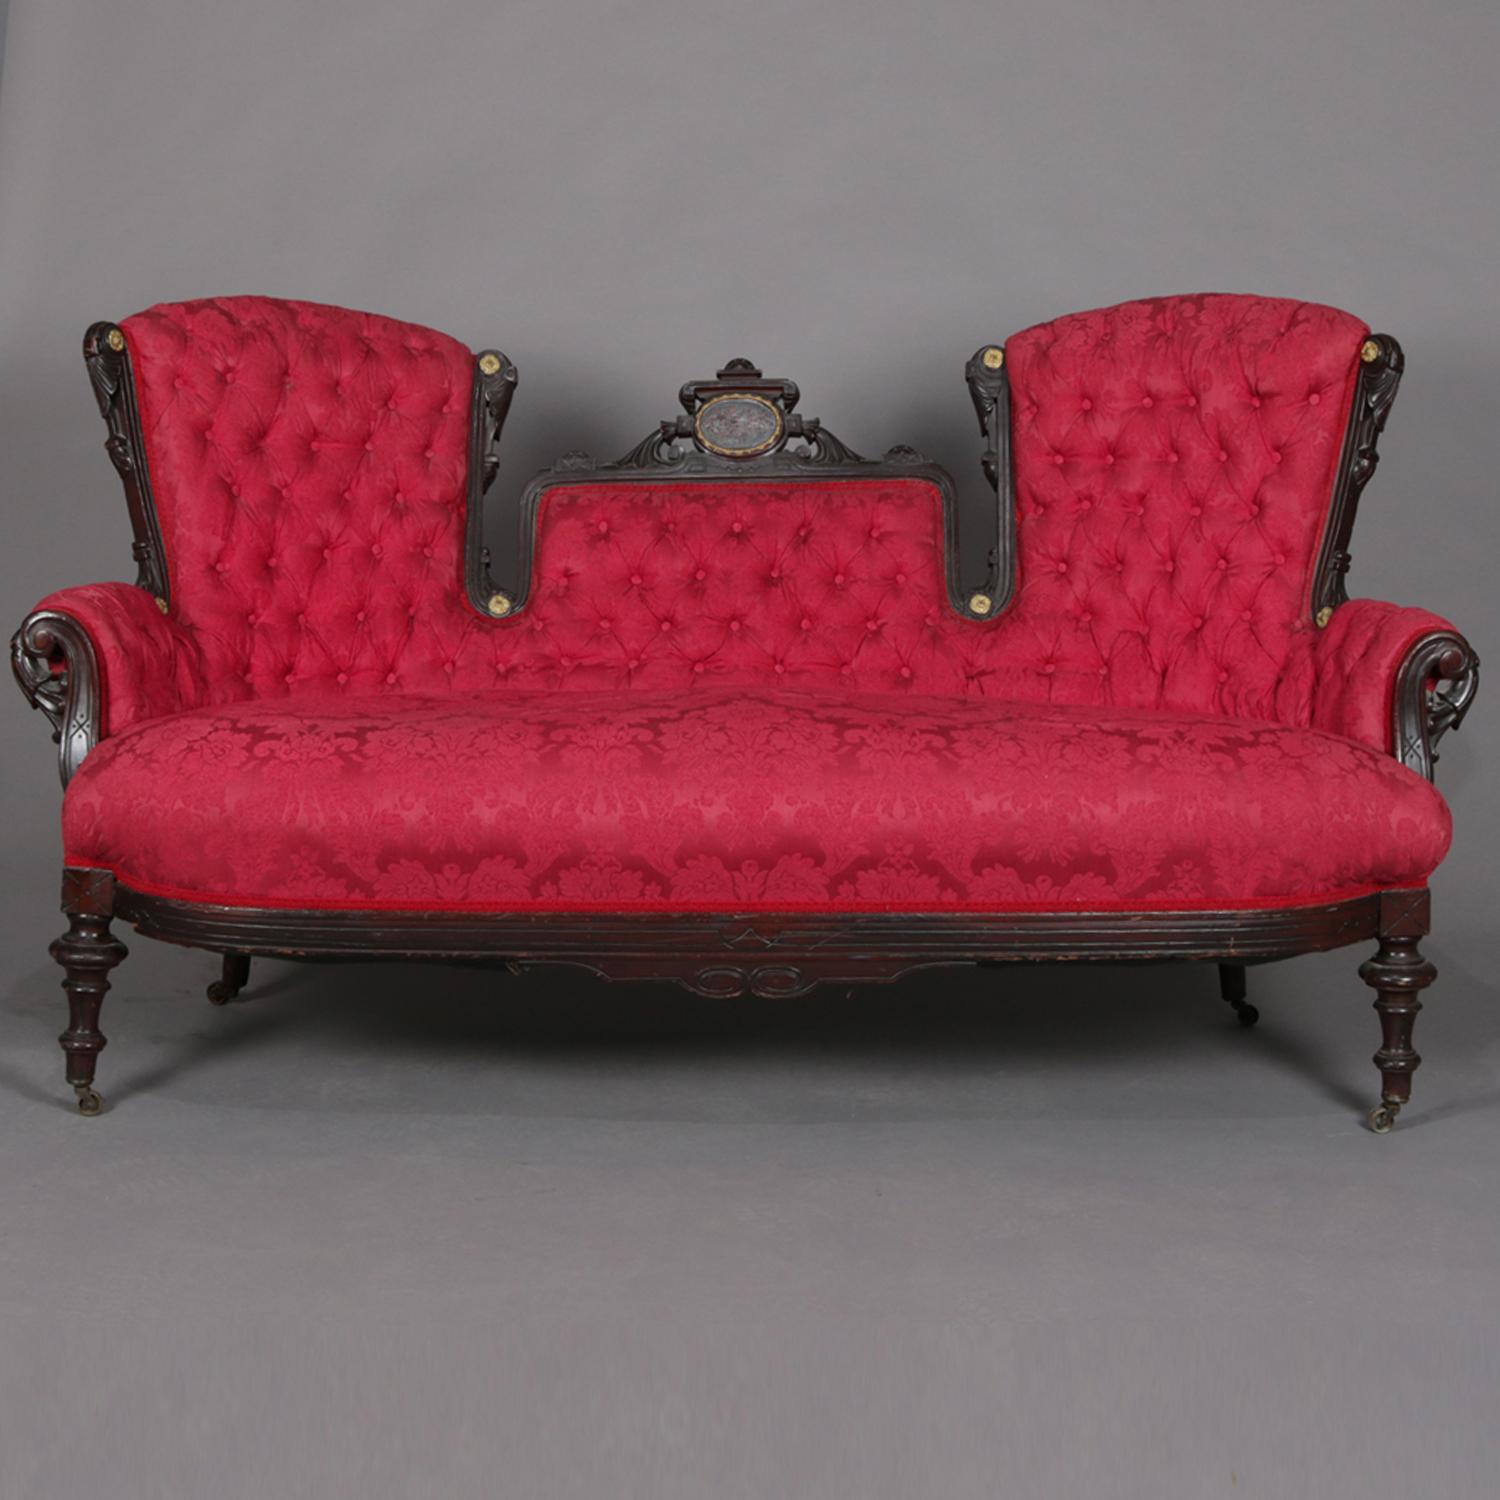 Antique Renaissance Revival Jelliffe School triptych sofa features carved frame with segmented back including crest with foliate inlaid medallion with gilt bordering, gilt rosettes throughout, and foliate scroll form arms, button back upholstered